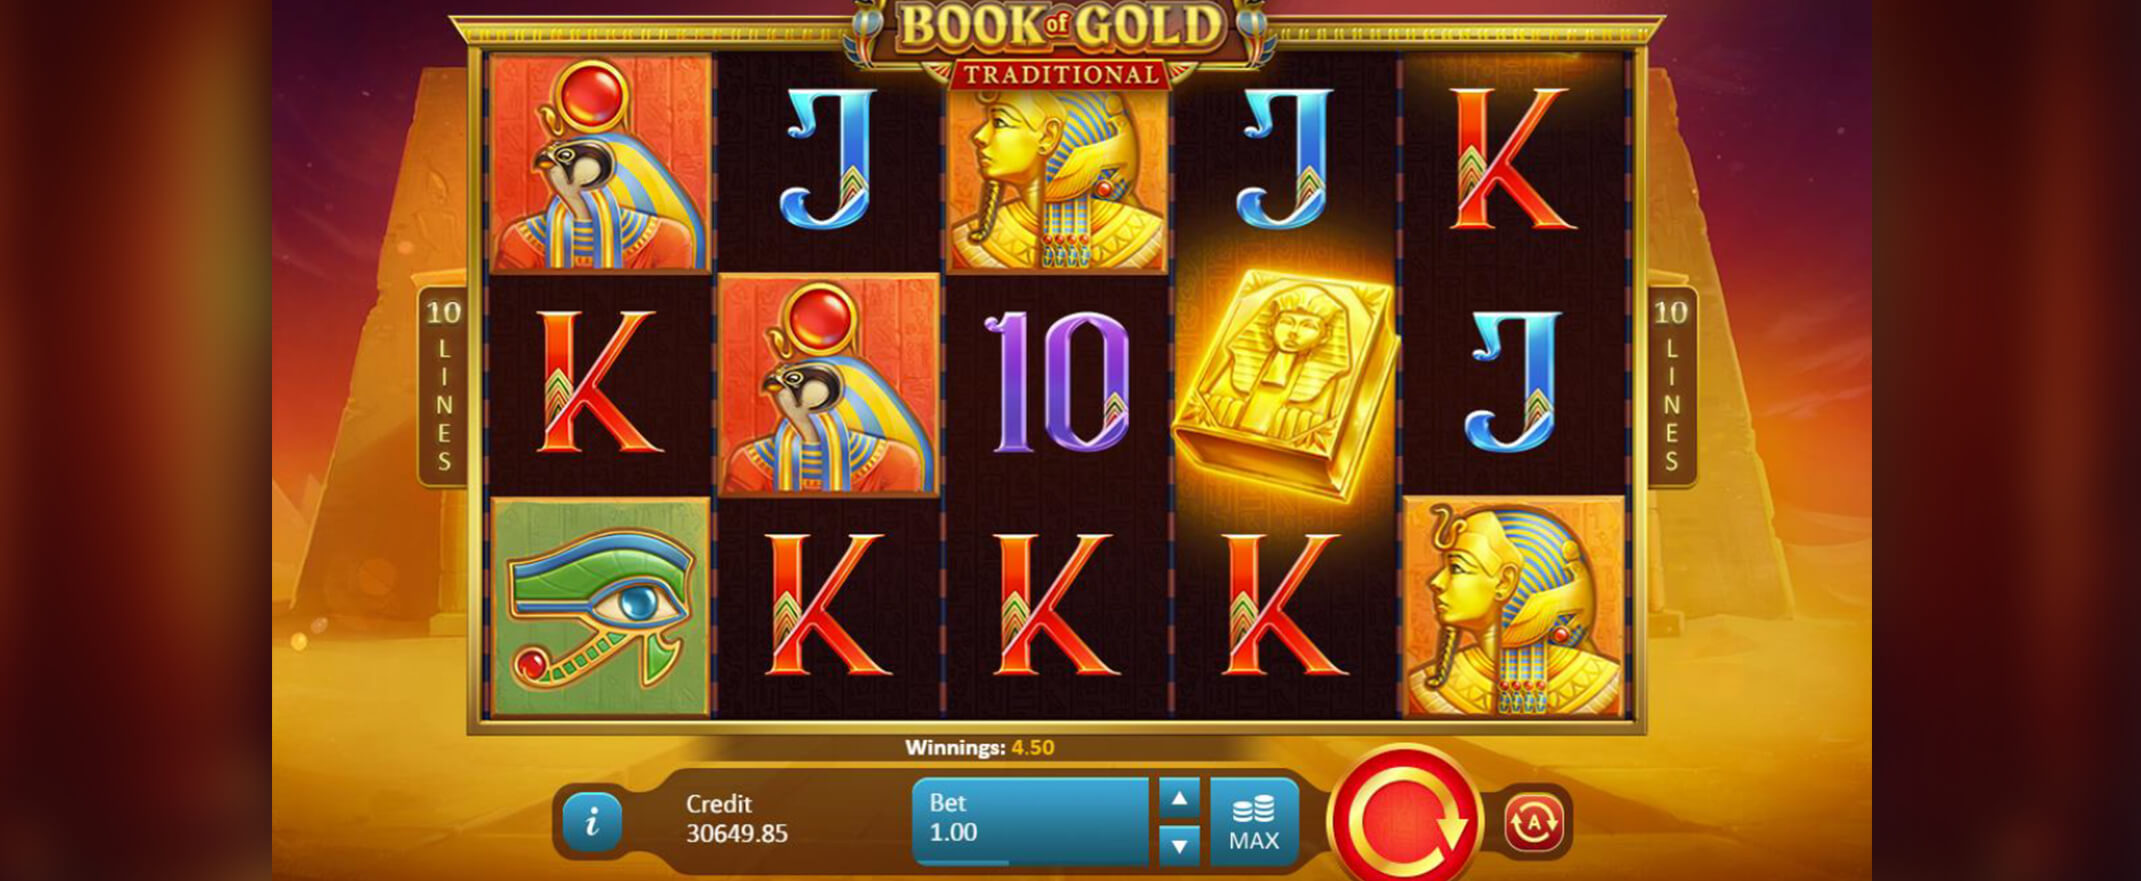 Book of Gold: Traditional slot from Playson